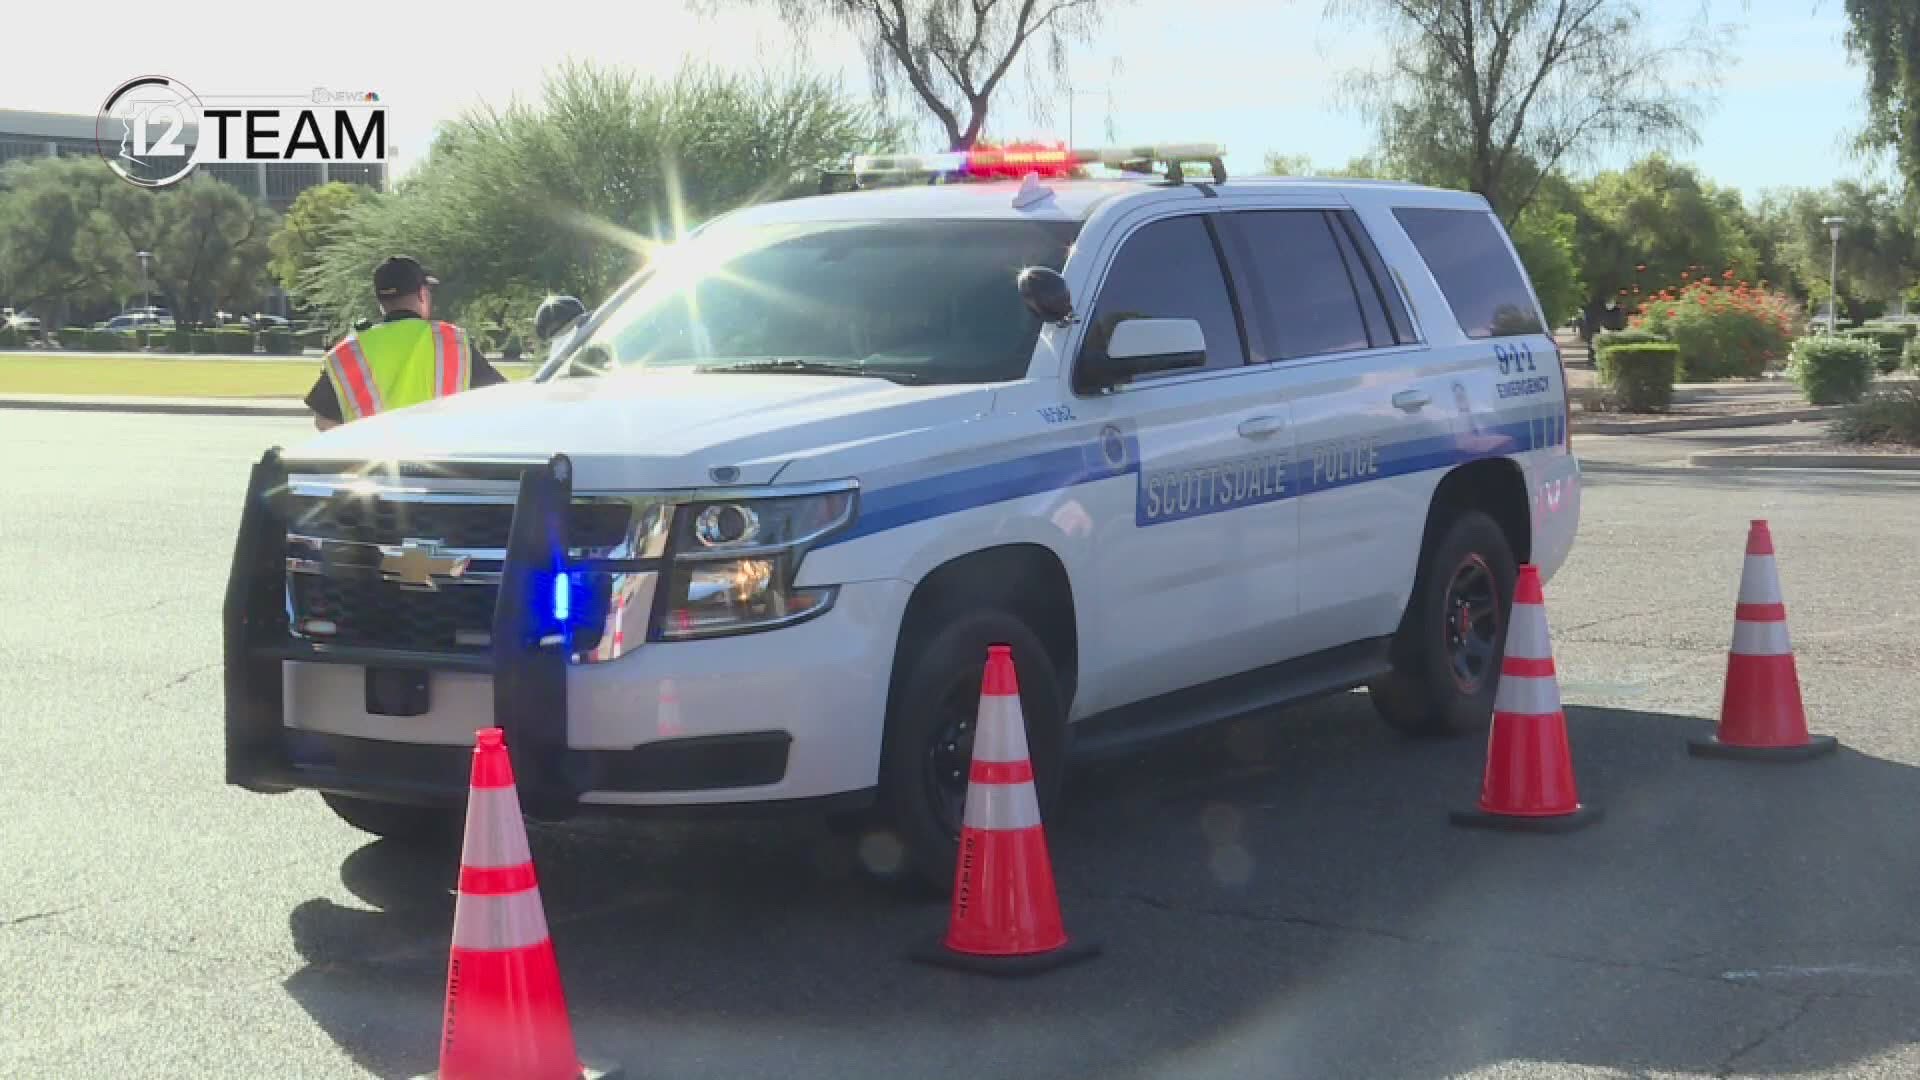 The Scottsdale Police Association says despite risking their health and safety during the COVID-19 pandemic, their officers aren't getting emergency sick leave.